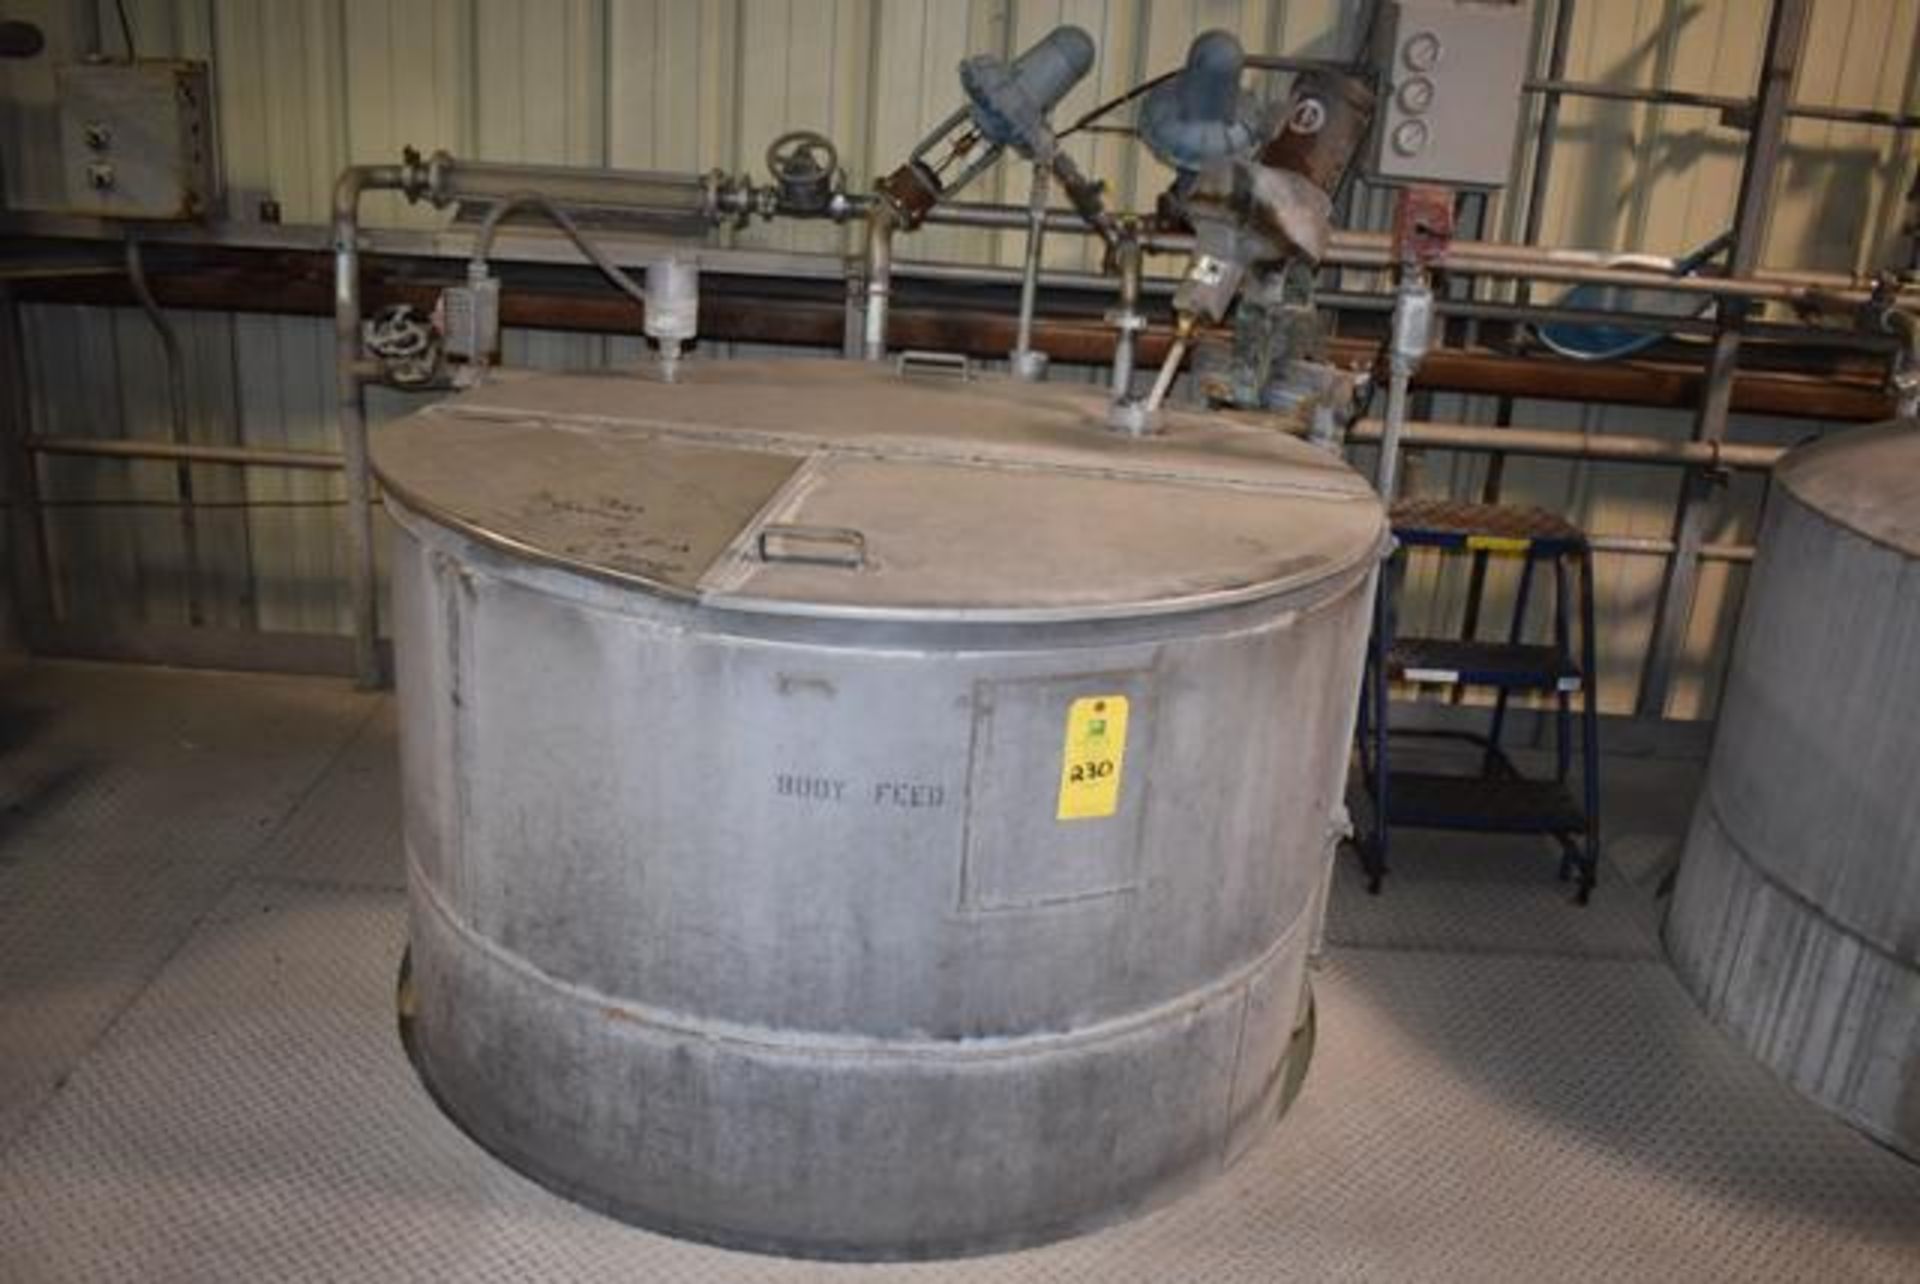 Stainless Steel Tank w/Lid, 5' Diameter x 6' Depth, Cone Bottom, Rated 900 Gal., RIGGING FEE: $700